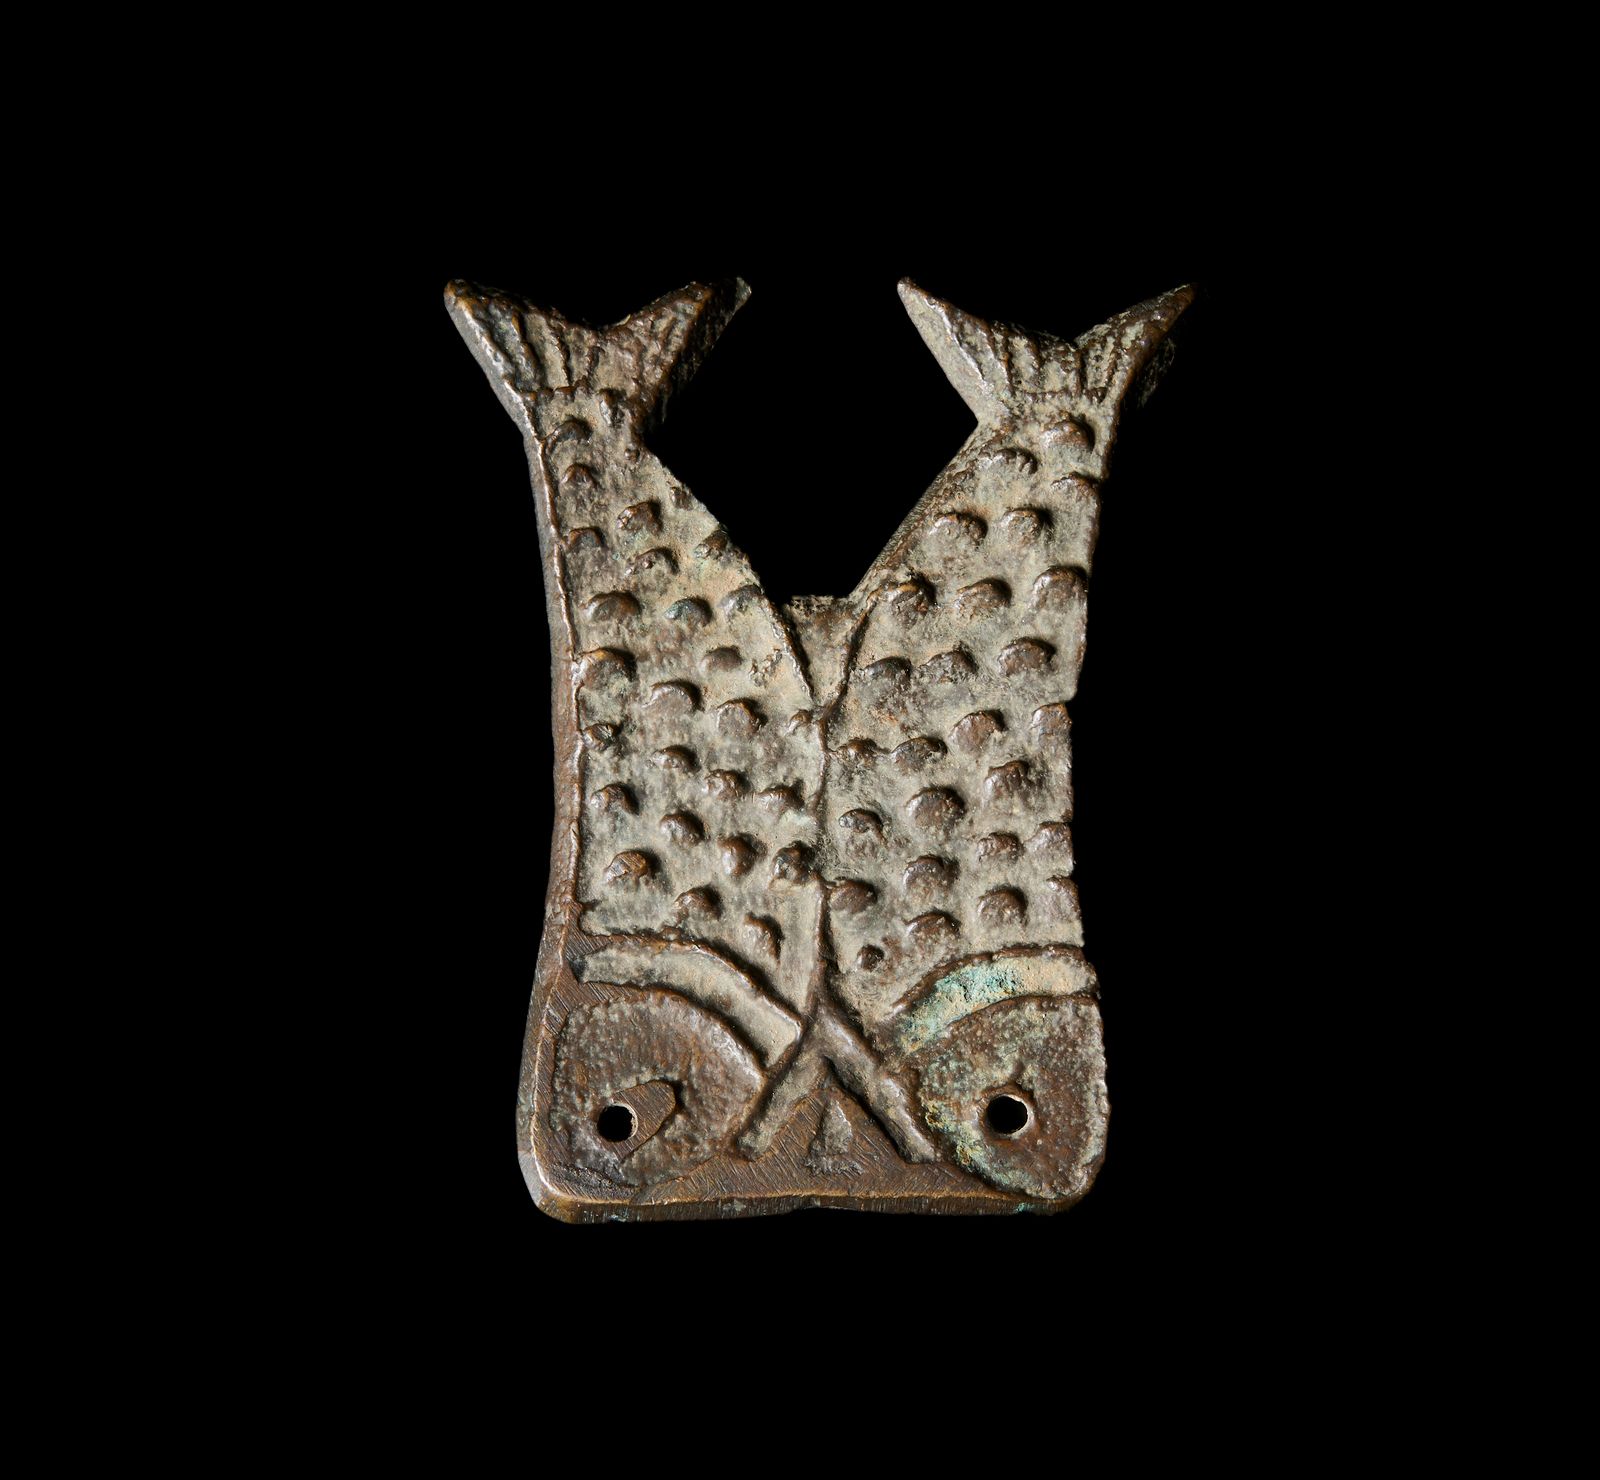 Chinese Art A bronze pendant depicting two fishes Arte cinese. Pendente in bronz&hellip;